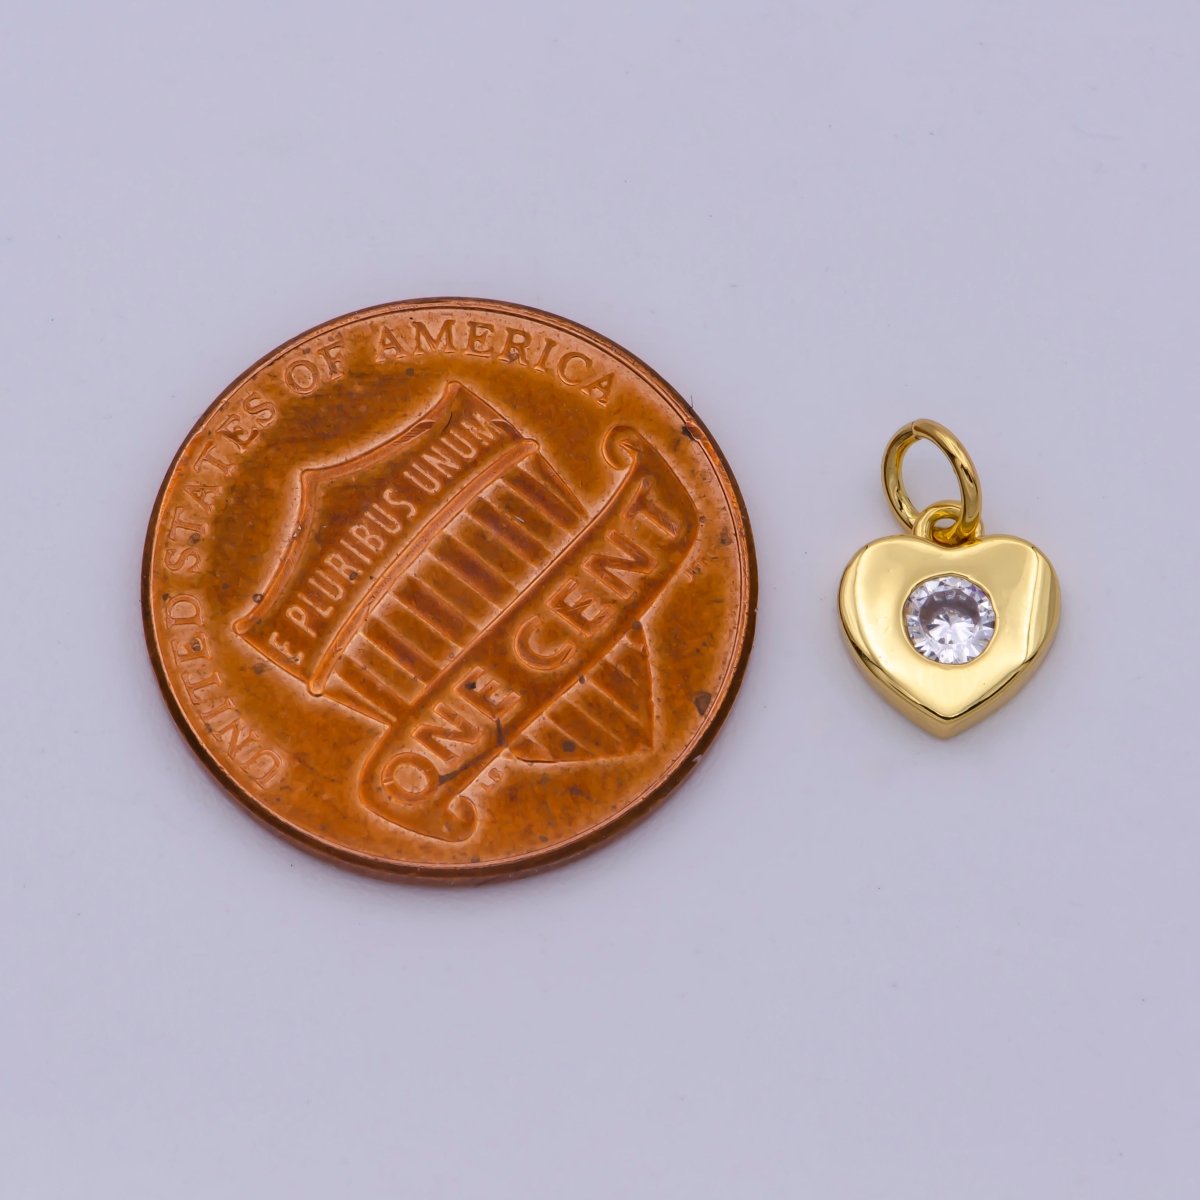 TINY Gold Filled Heart Charm Small Cz Heart Charm add on Handmade Jewelry Supplies. Handcrafted Supplies M-872 - DLUXCA